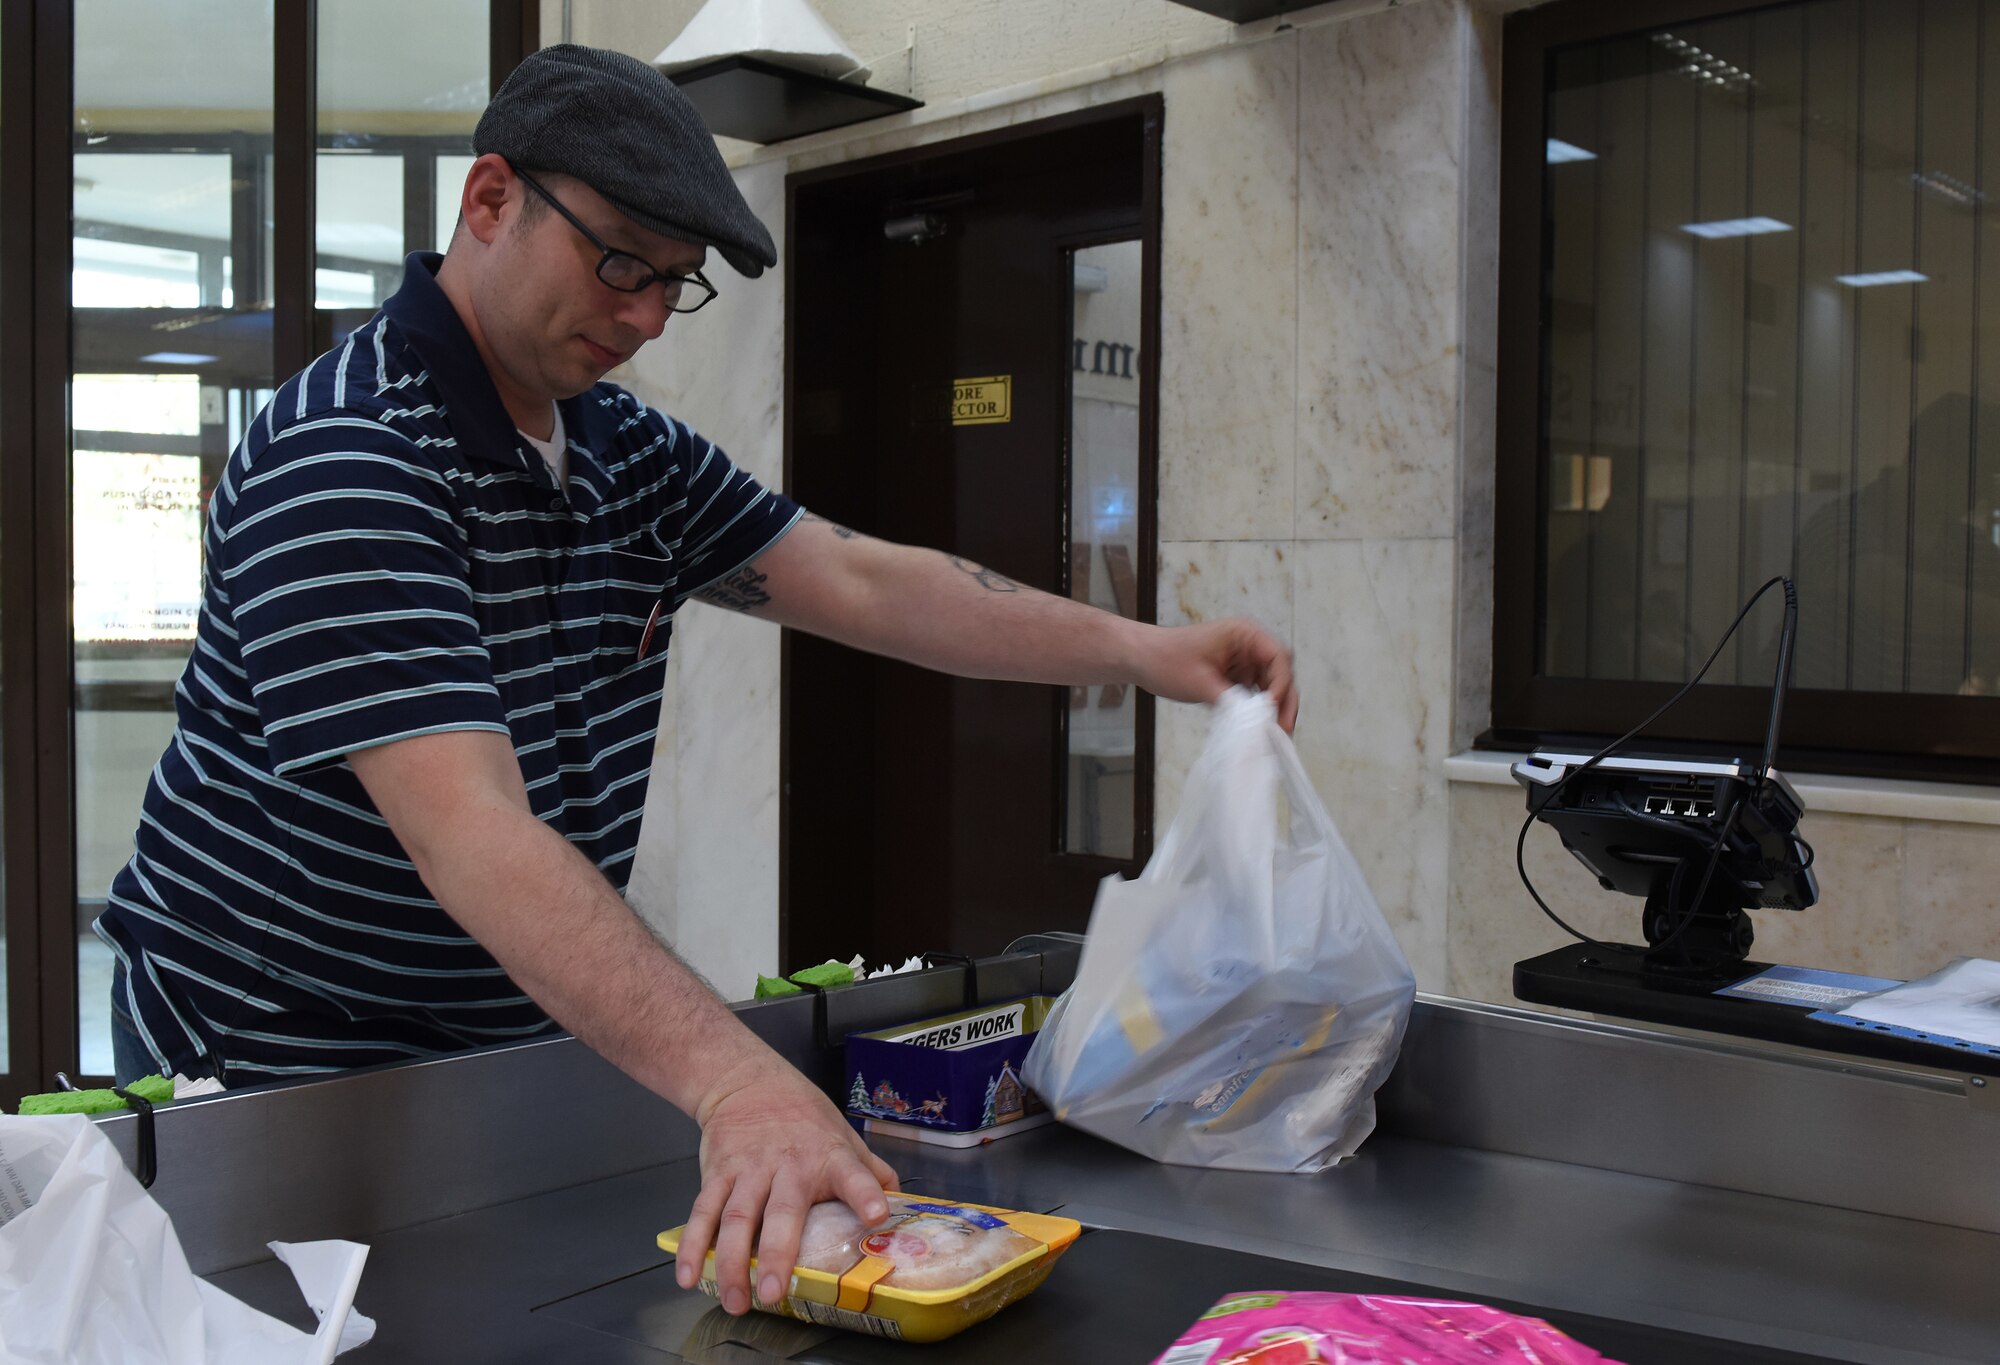 U.S. Air Force Master Sgt. Travis Lacy, 39th Force Support Squadron superintendent of manpower, organization and continuous process improvement, bags groceries at the Commissary at Incirlik Air Base, Turkey, June 19, 2018.